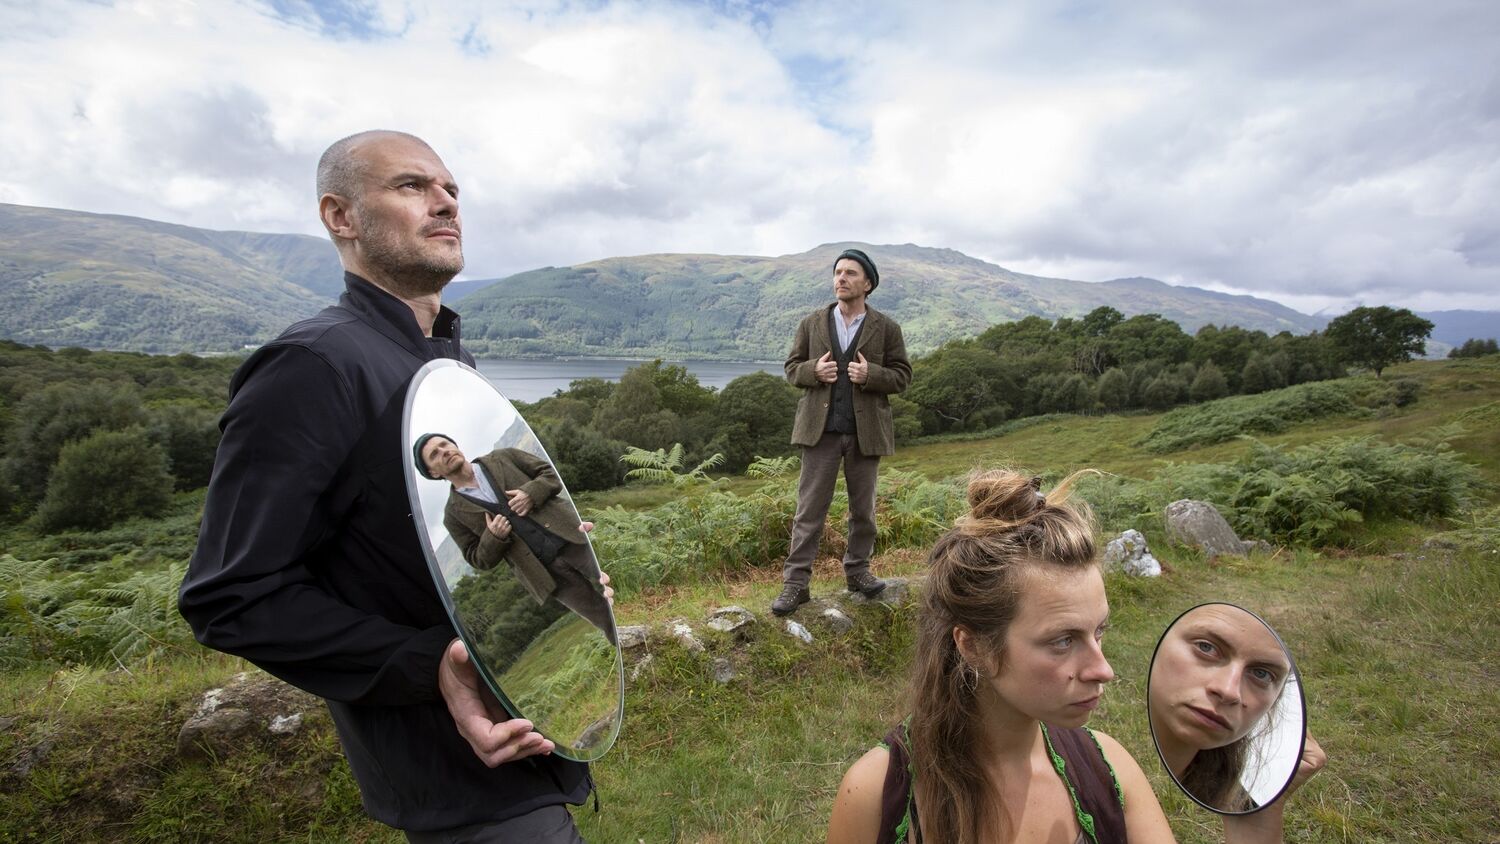 Three people stand on a grassy hillside overlooking Loch Lomond. The man on the left holds an oval mirror, which shows the reflection of the man in the middle, holding the lapels of his tweed jacket. The lady on the right holds a circular mirror to show a reflection of her face.